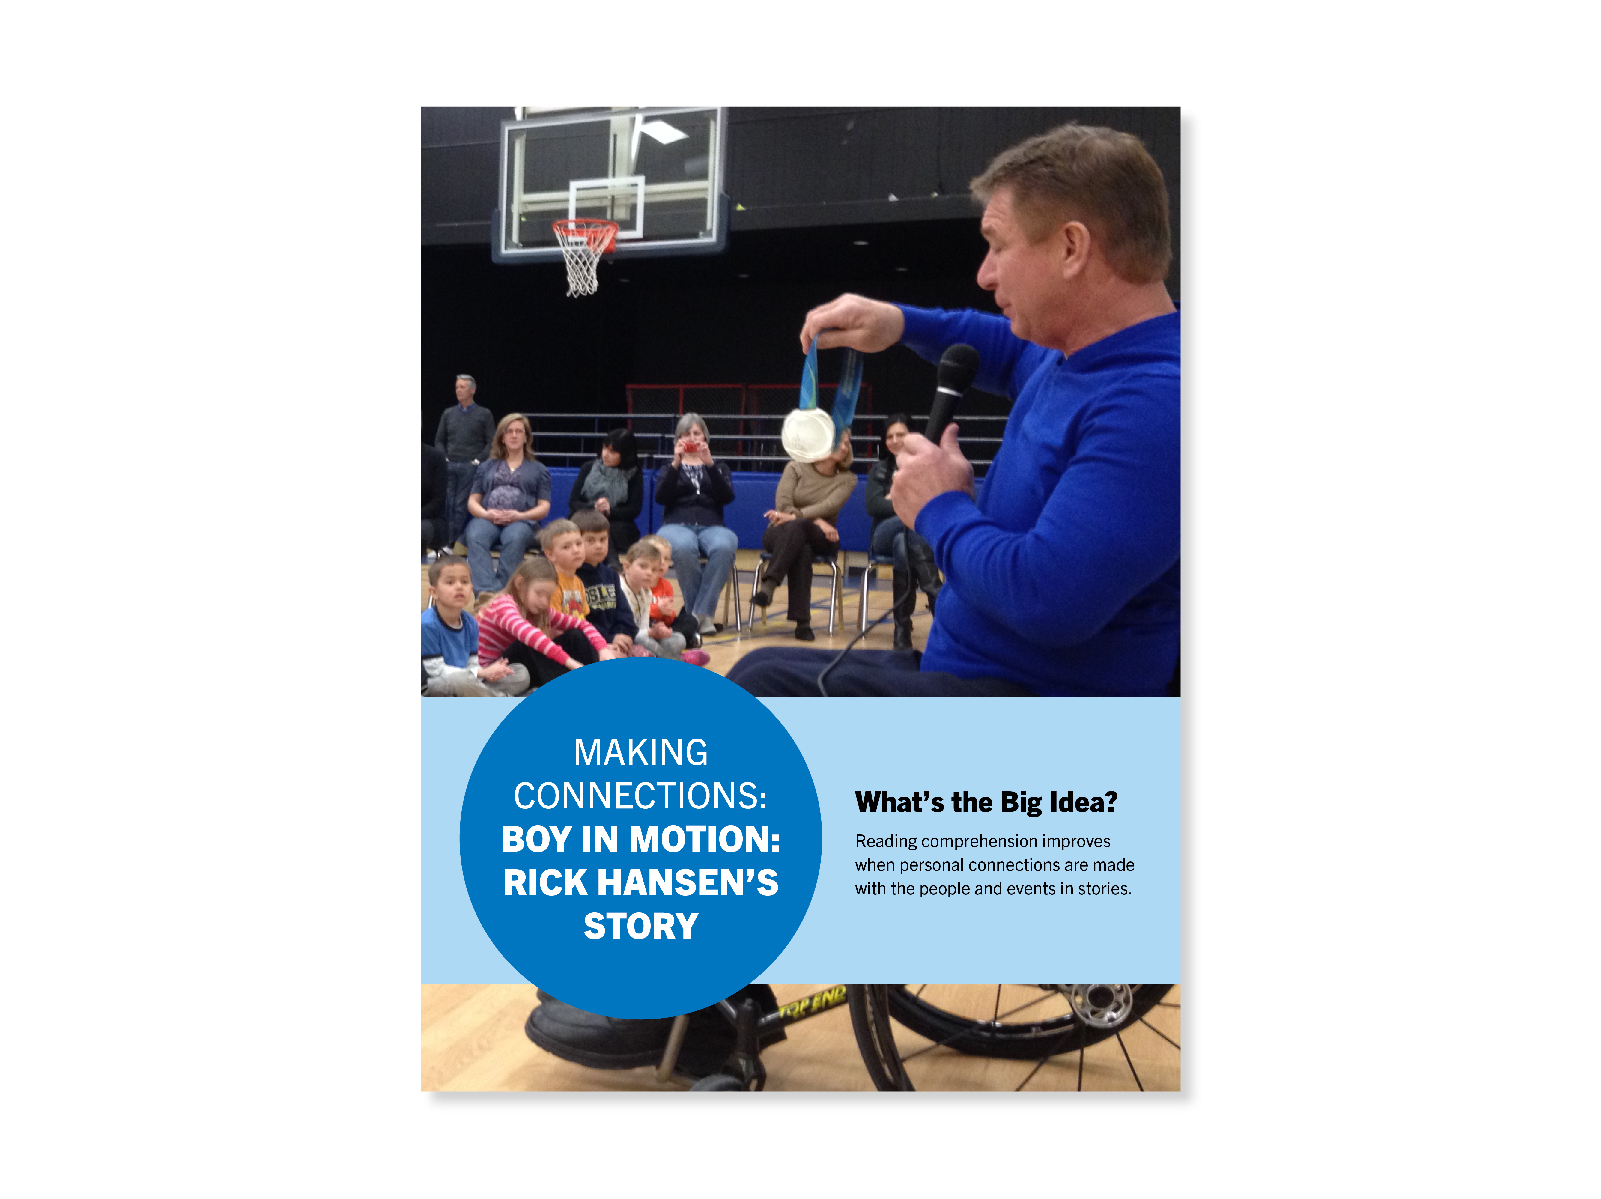 Cover for Making ConnectionsRick Hansen holding up a silver medal, as he uses a microphone to speak to a group of seated students and teachers. They are in an elementary school gymnasium - a basketball hoop hangs over the staff. Cover for "Making Connections" lesson.